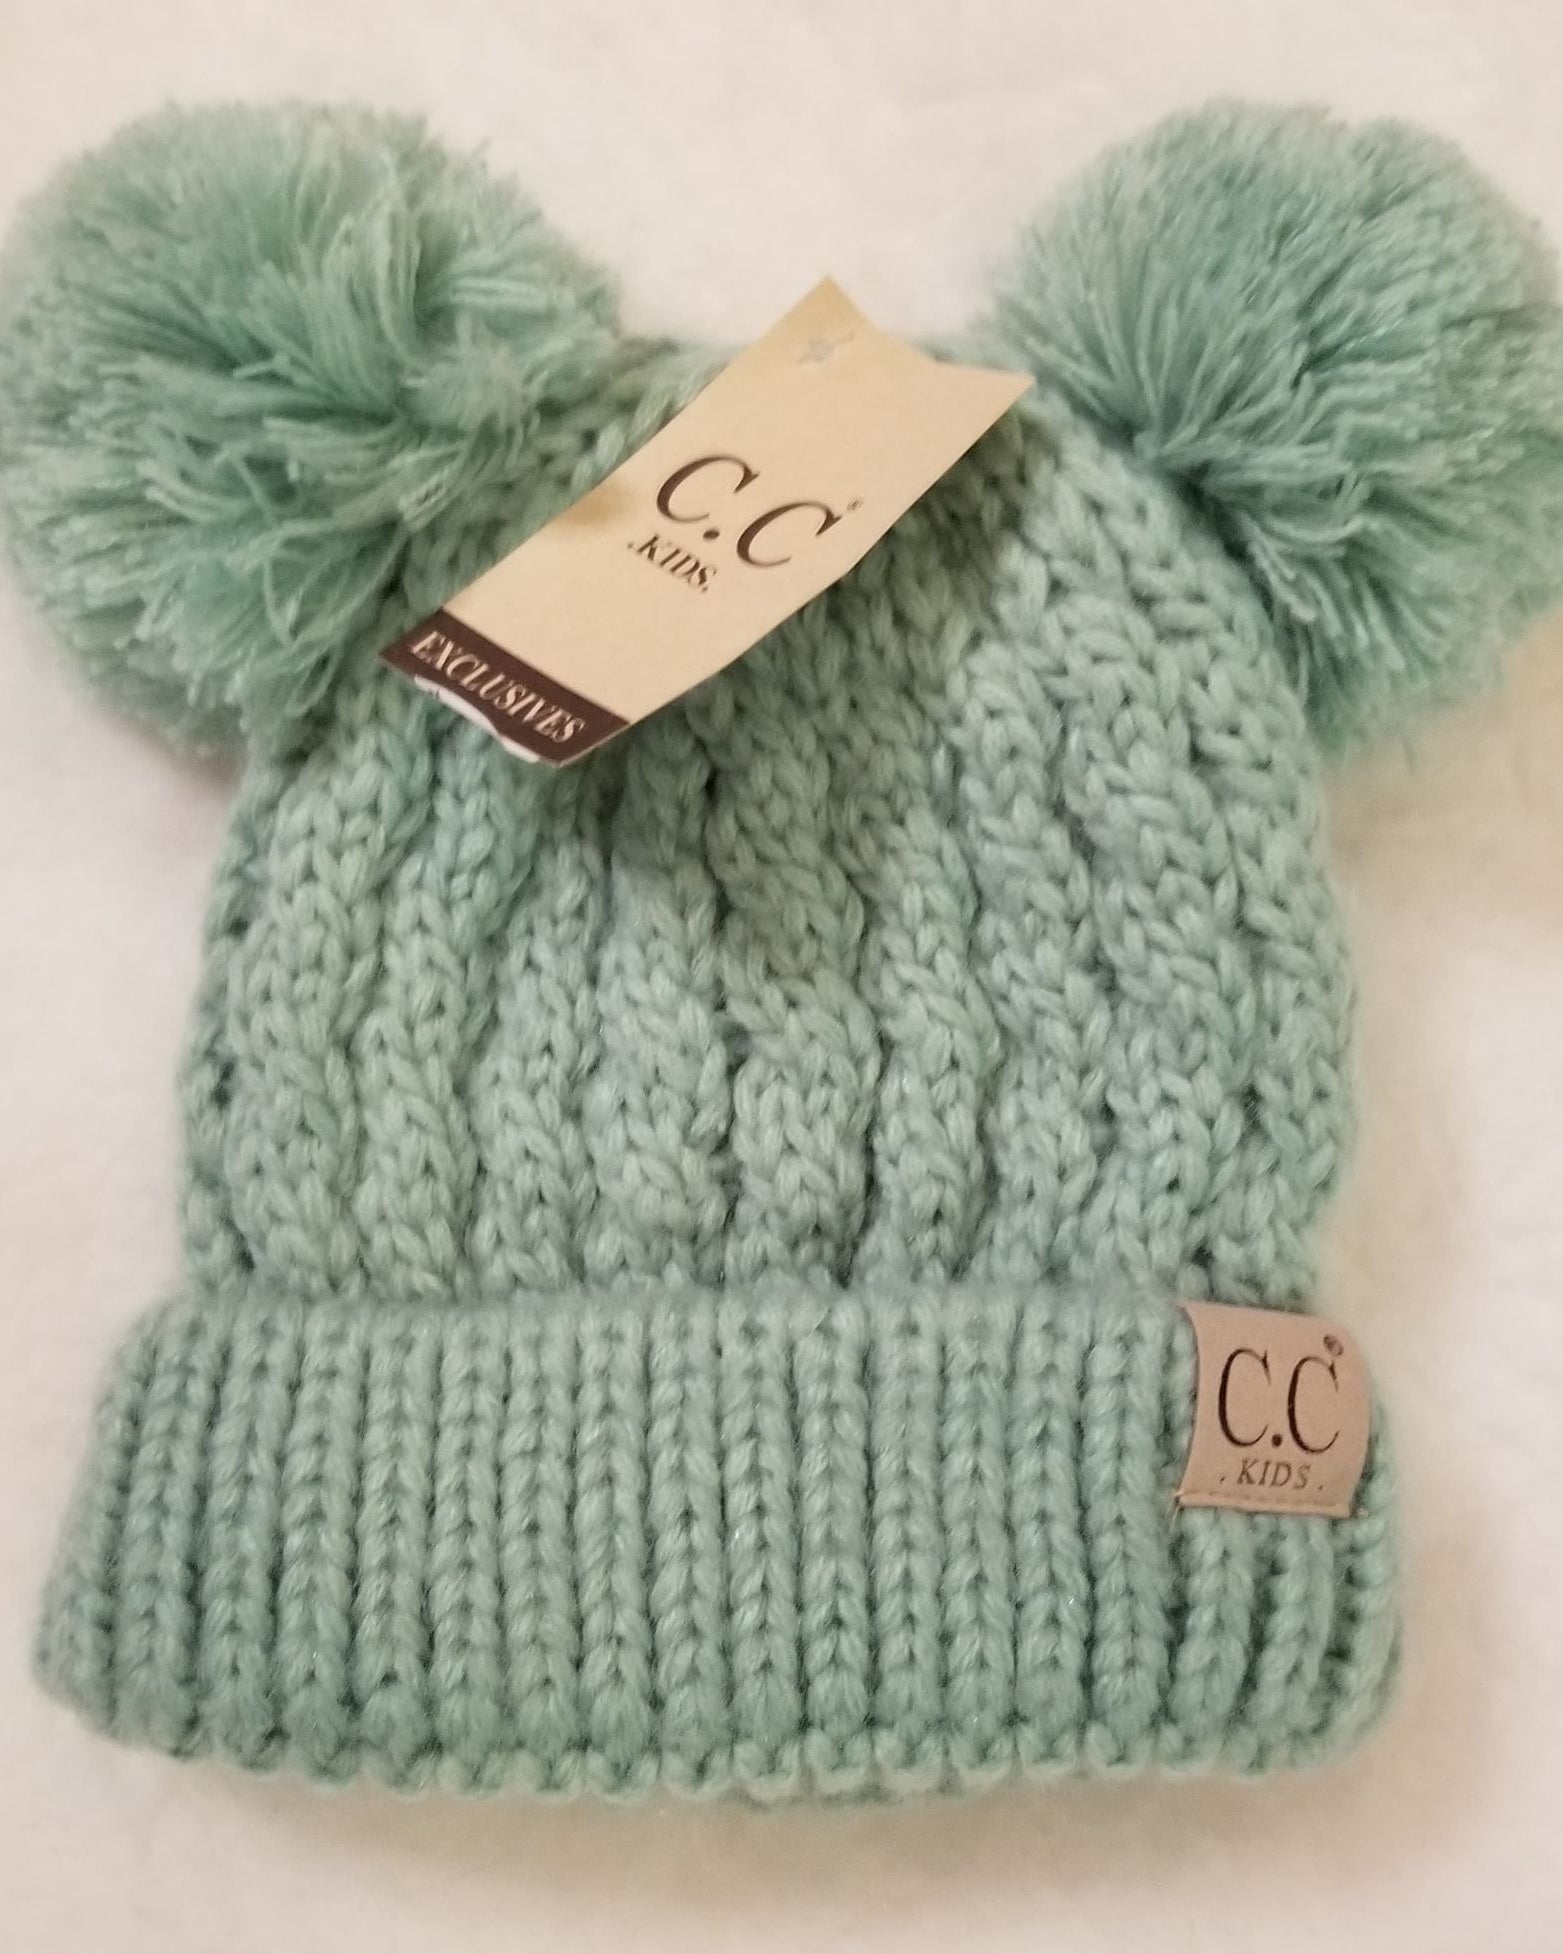 Kids Solid Double Pom CC hat- additional colors  A Touch of Magnolia Boutique Mint  